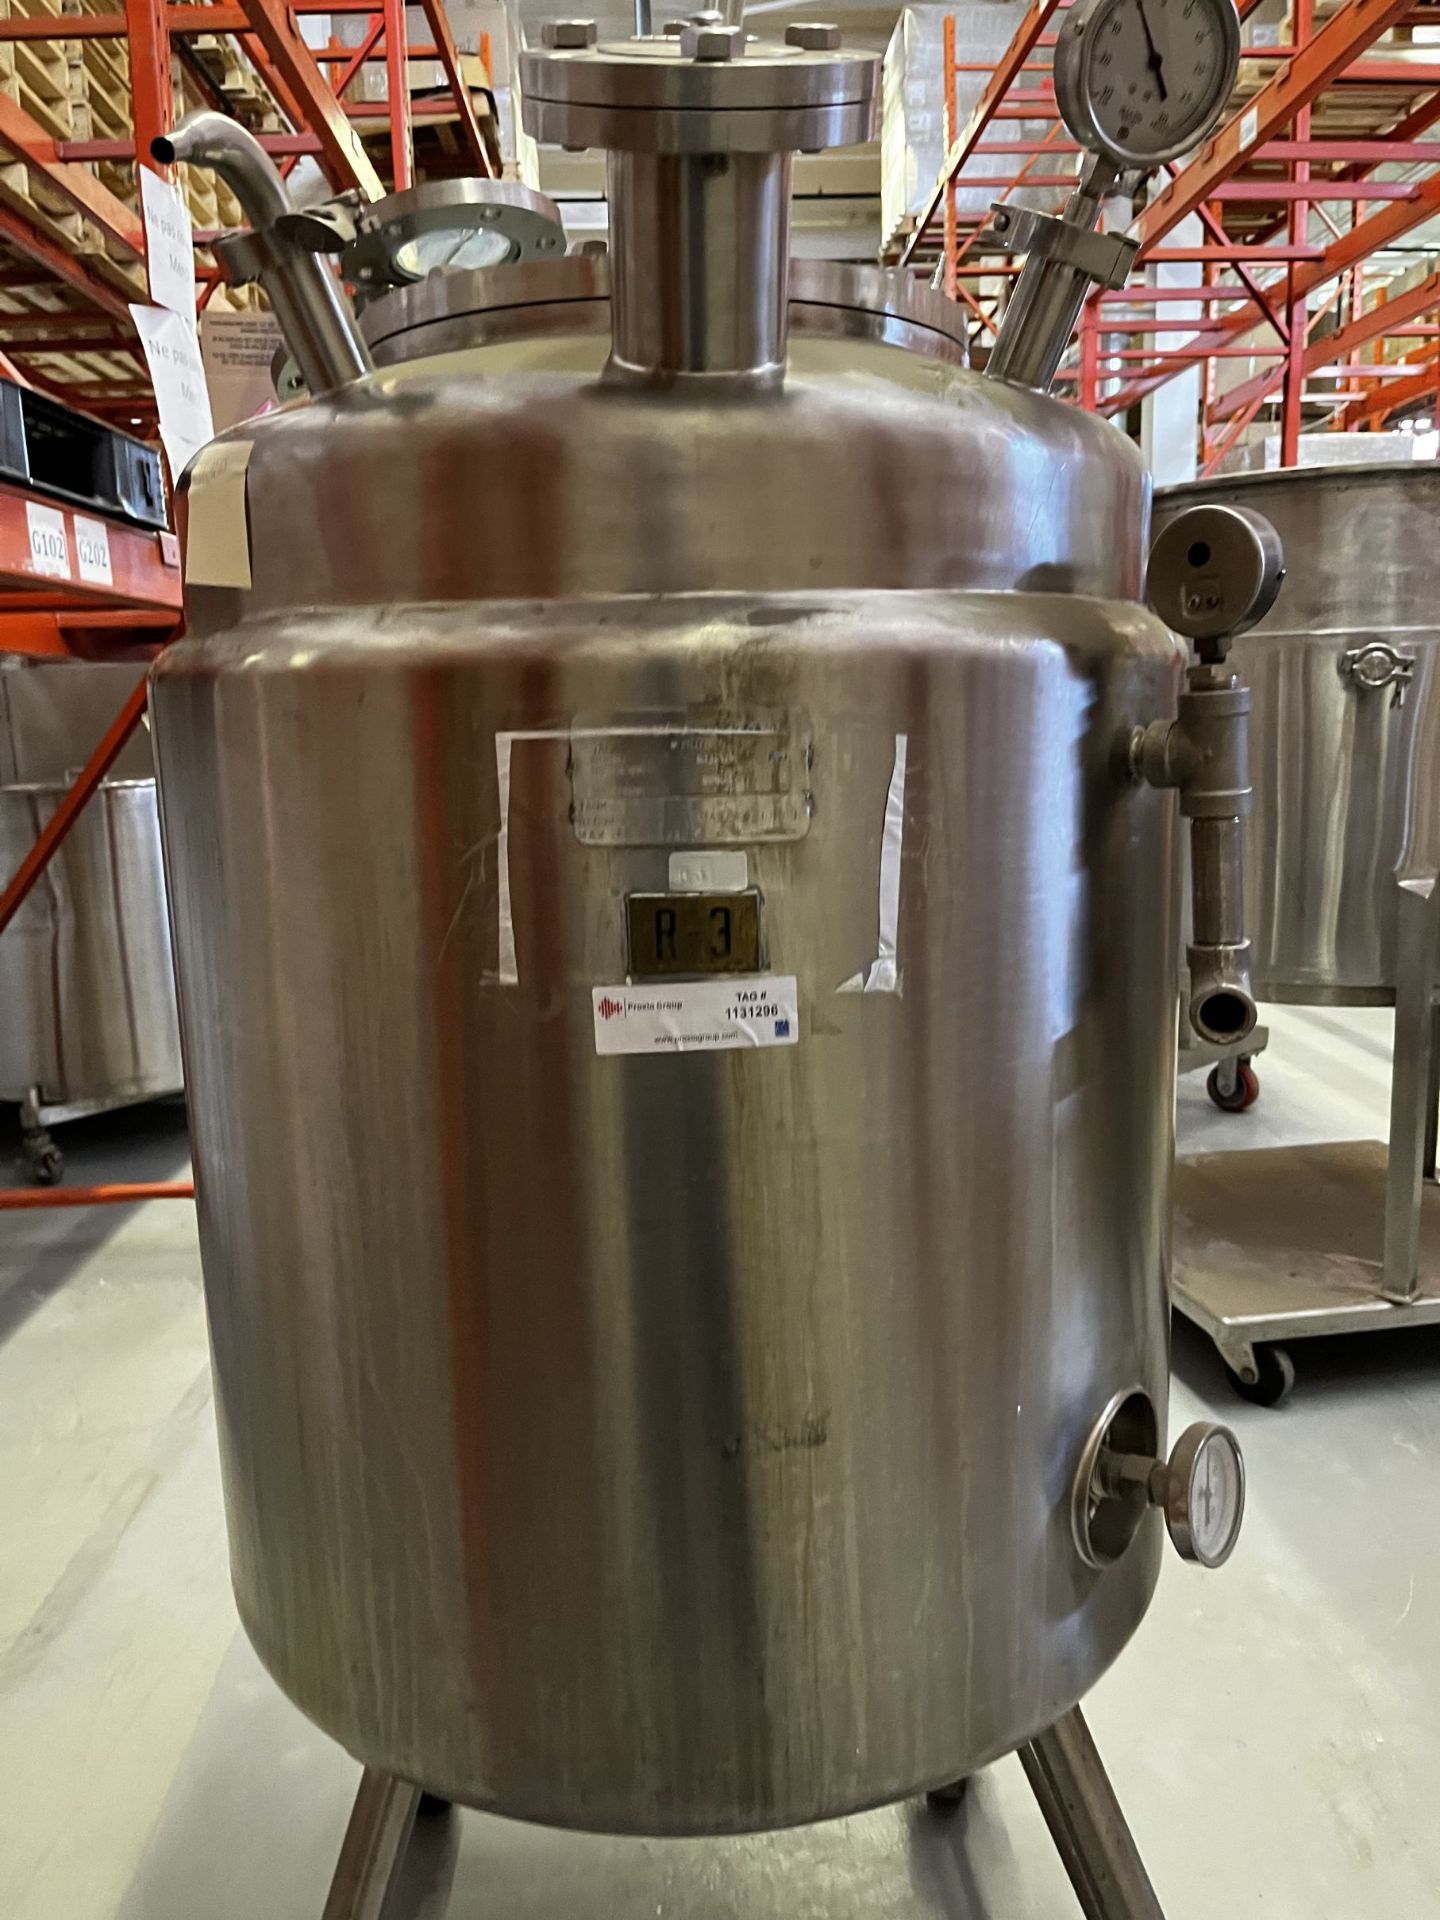 ESCAN Stainless Steel Jacketed Tank mod: SK0070 - Image 2 of 7